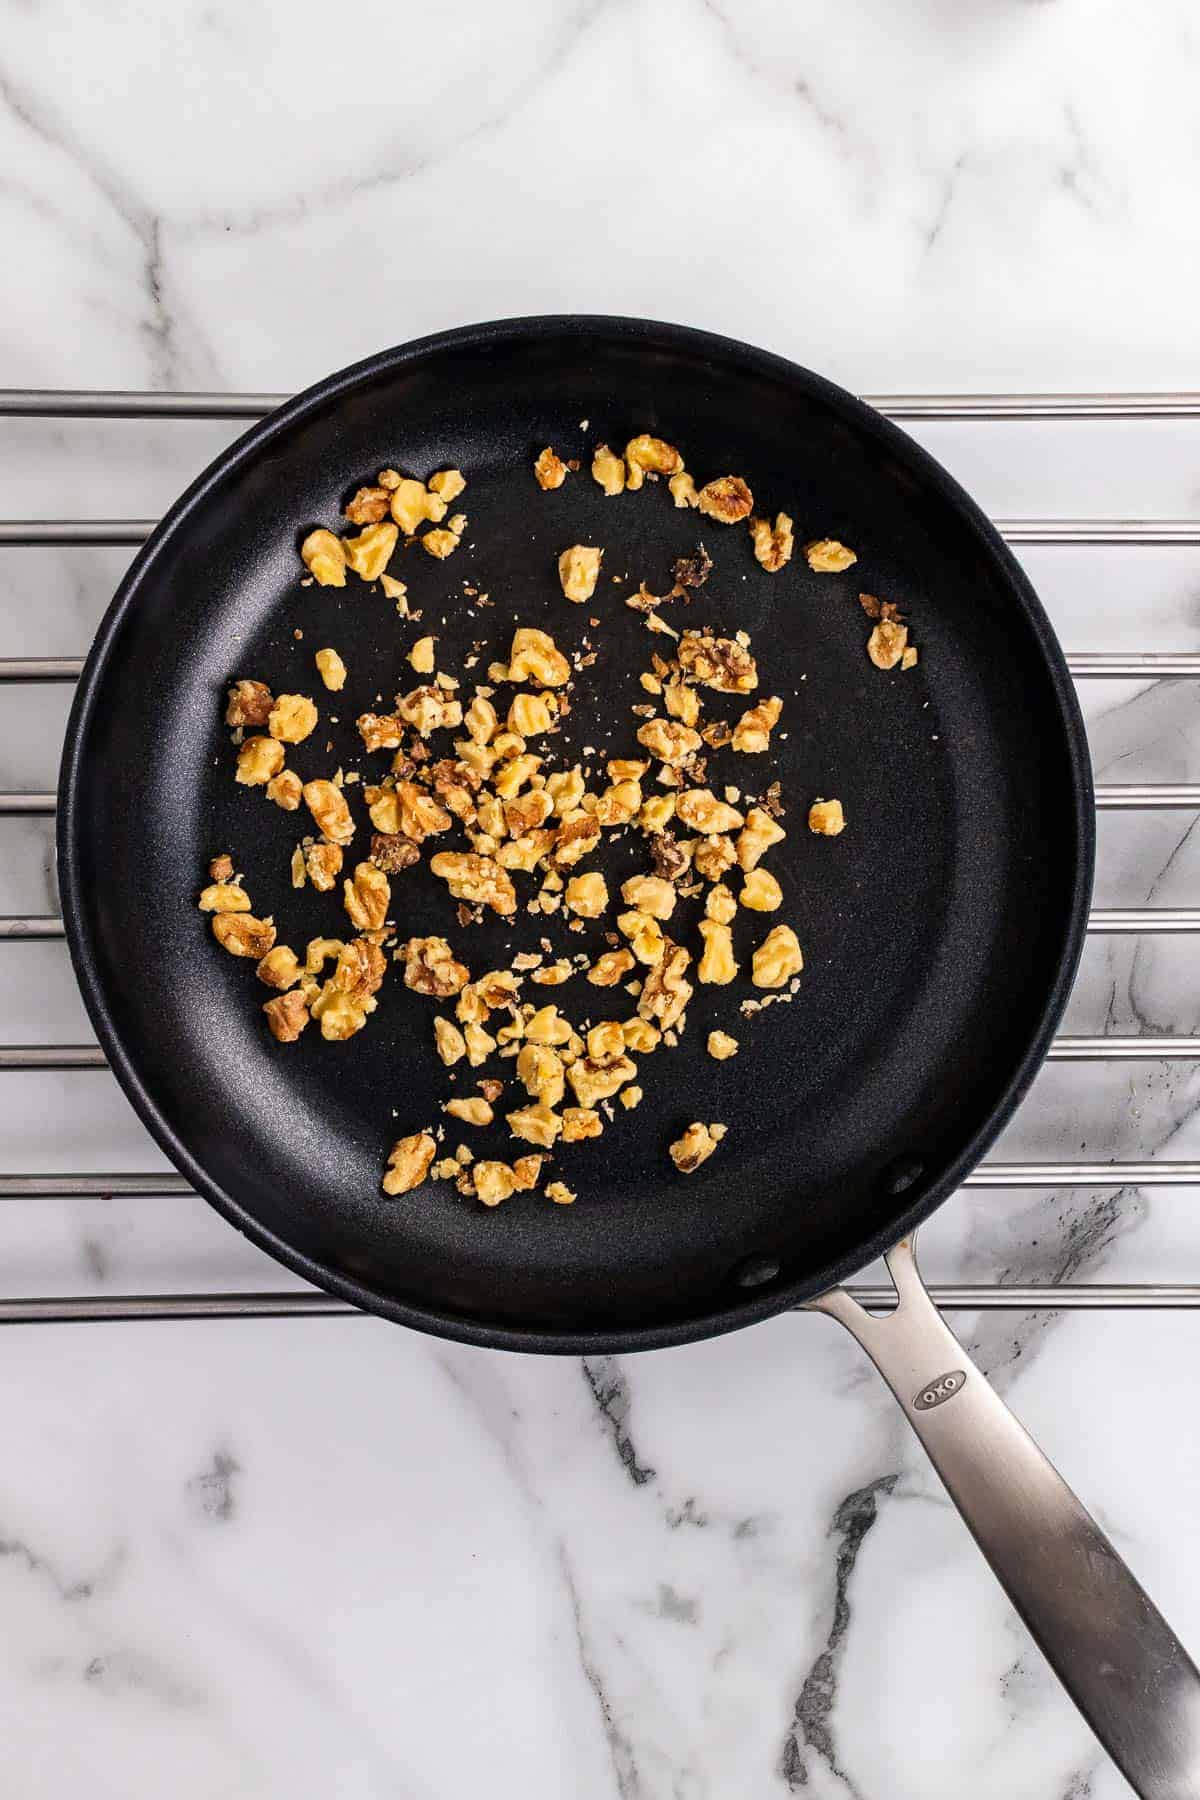 Walnuts browning on a pan